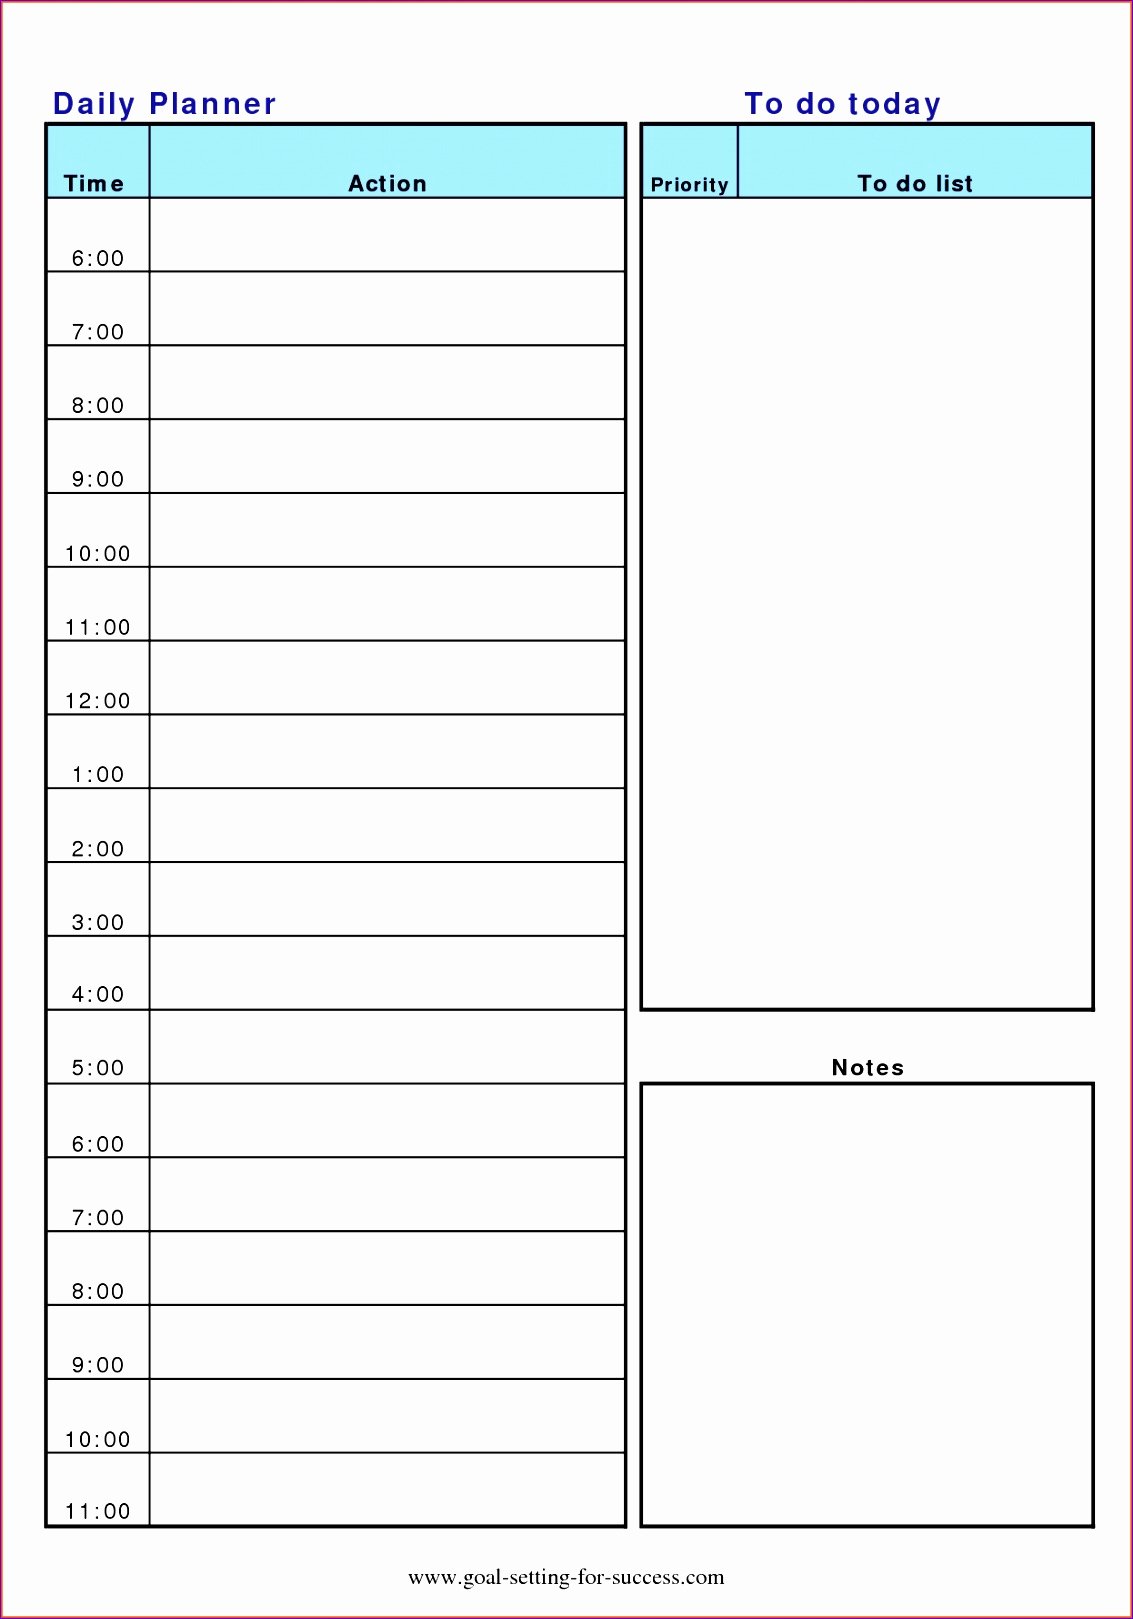 Daily Planner Excel Template New 8 Daily Planner Excel Template Exceltemplates